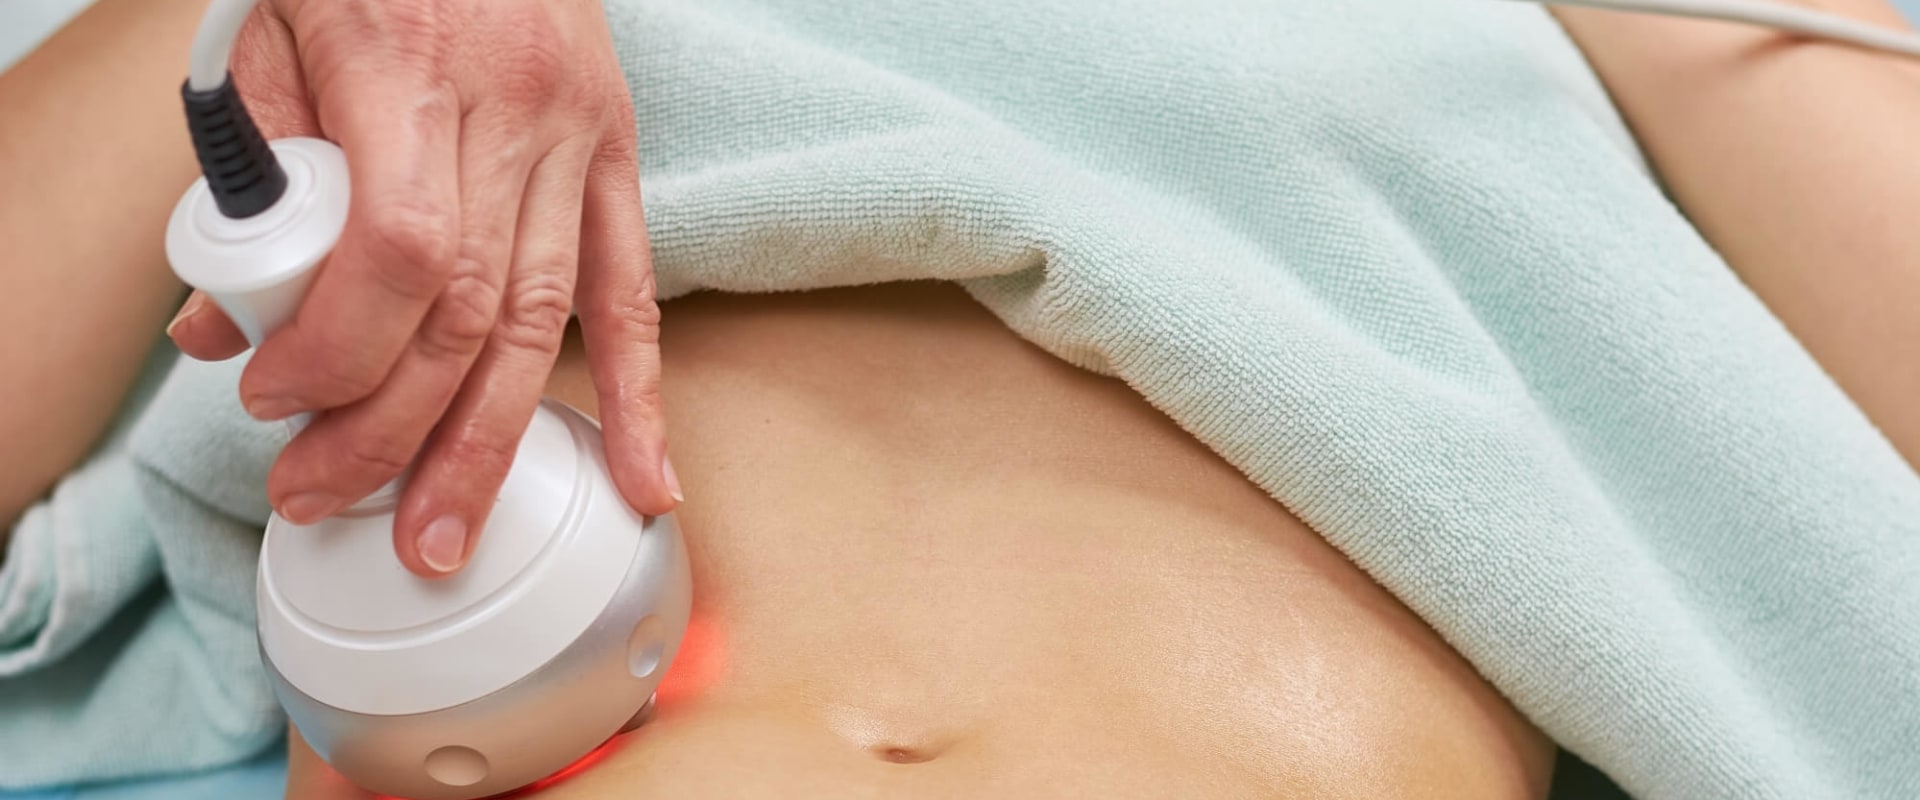 Non-Invasive Fat Reduction Treatments: Pros and Cons